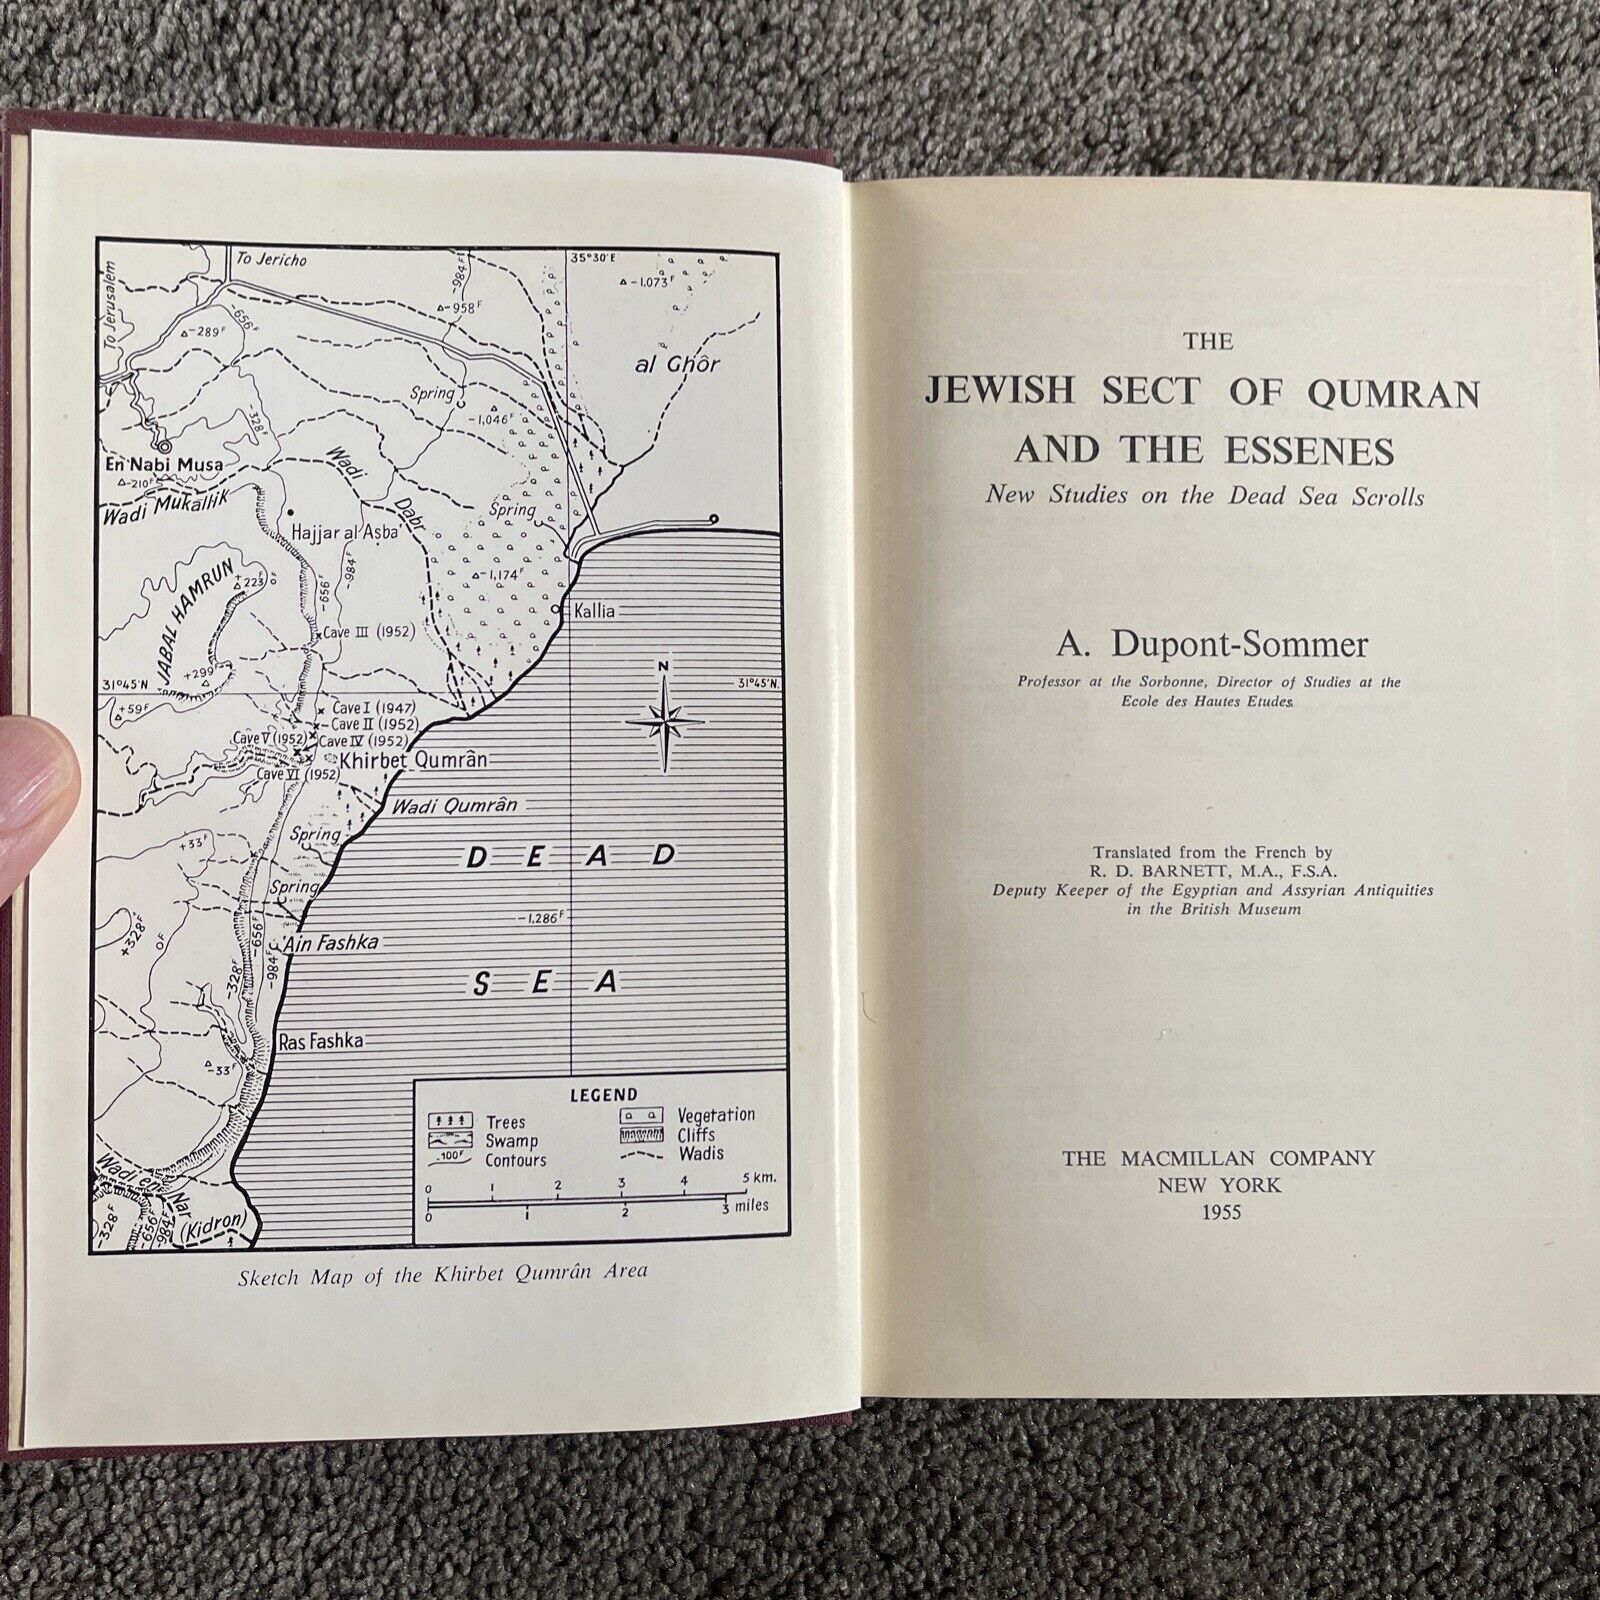 The Jewish Sect of Qumran and the Essenes Book 1955